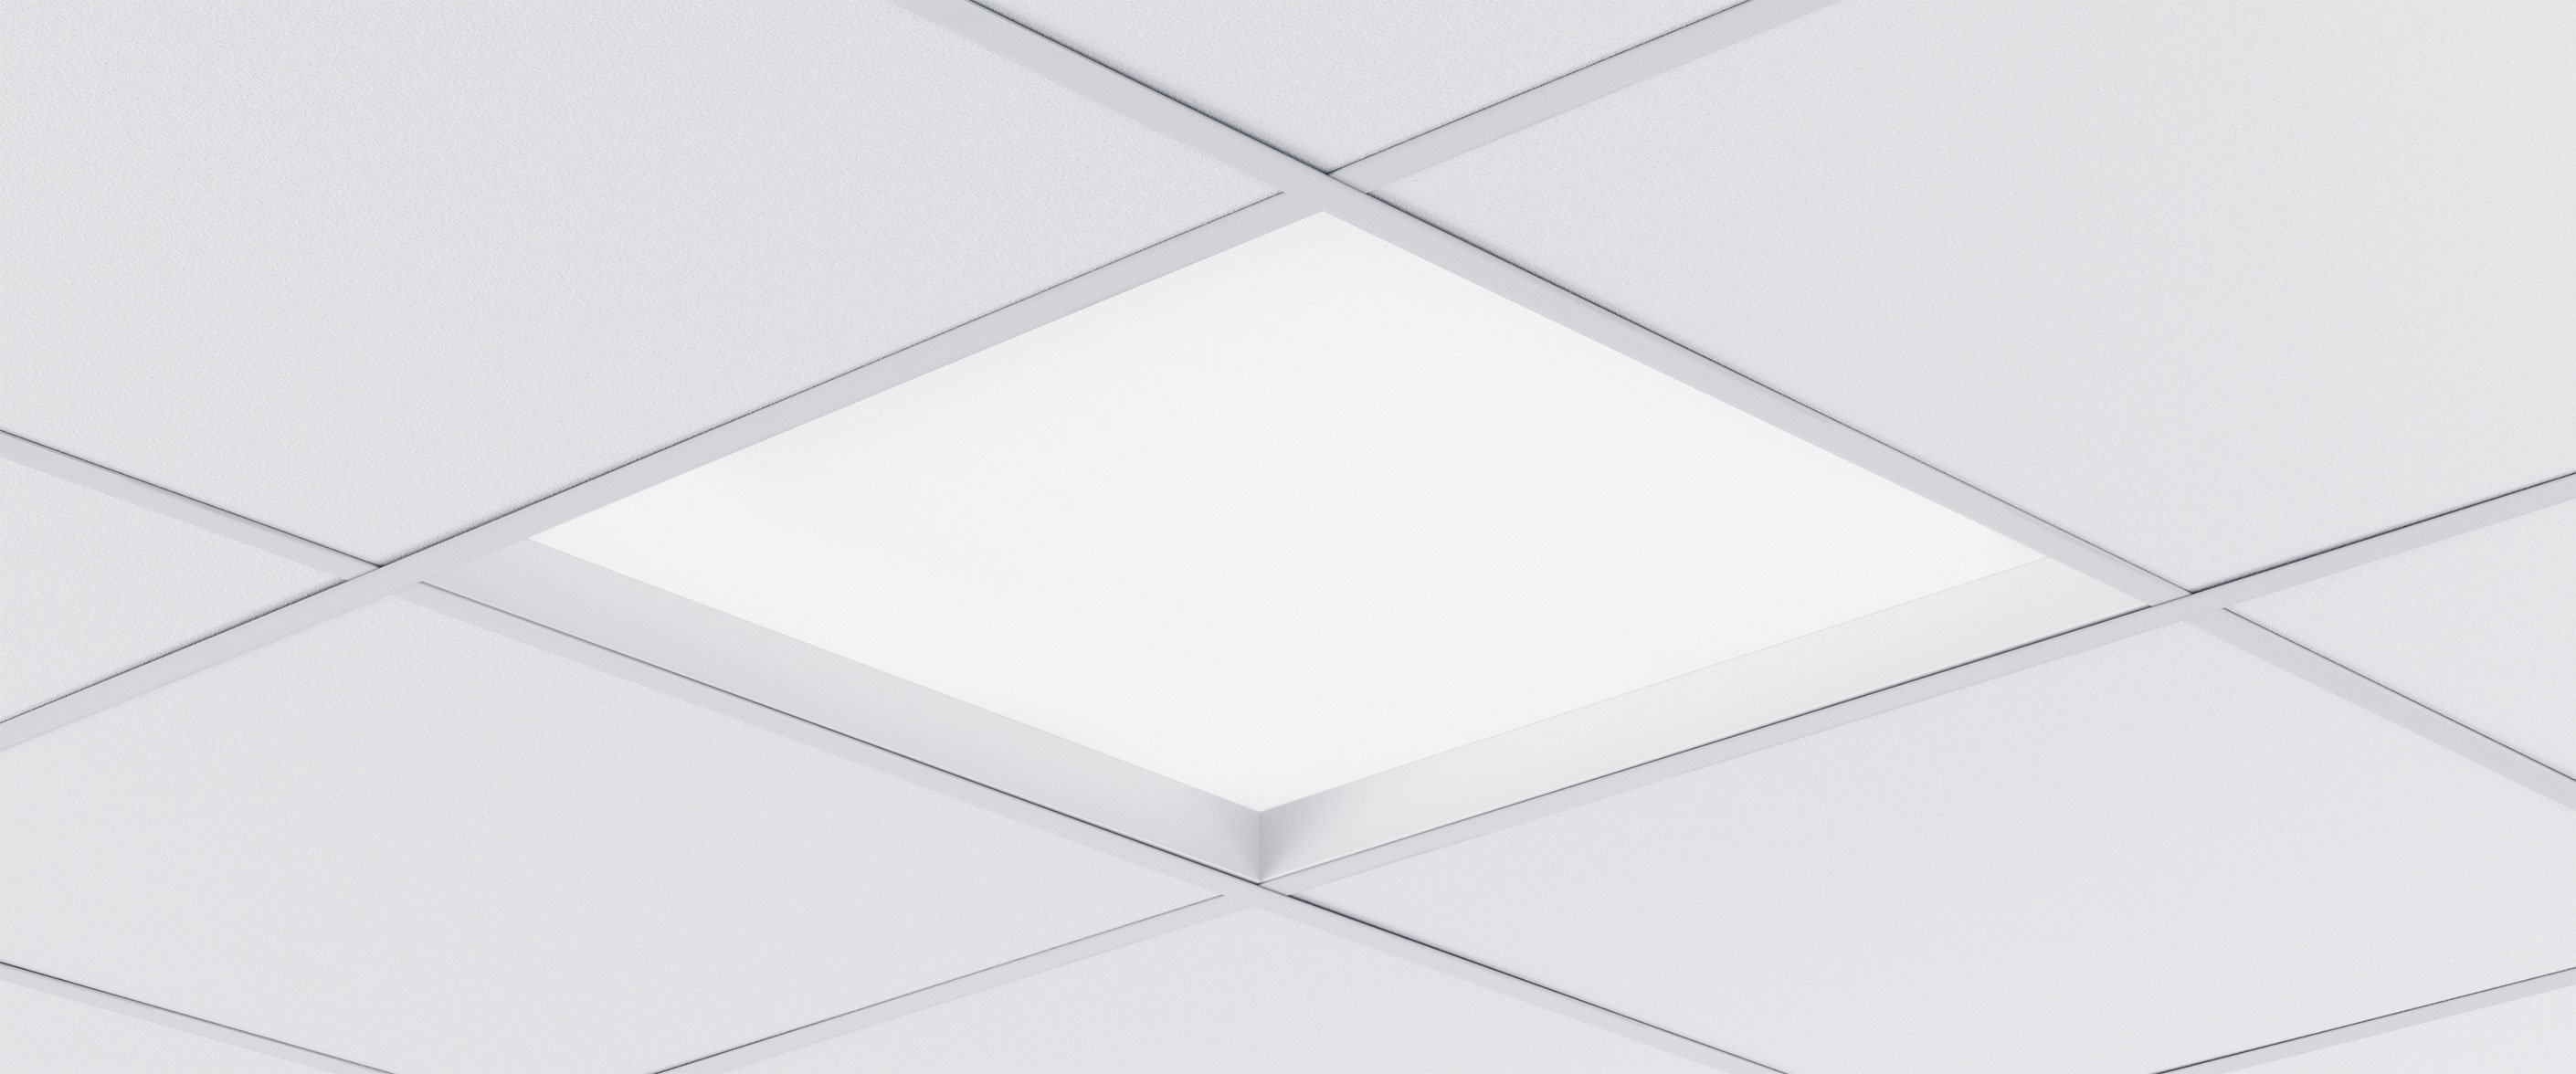 Sky Frame - decorative accessory for recessed 600x600 luminaires. See more versions under Accessories.